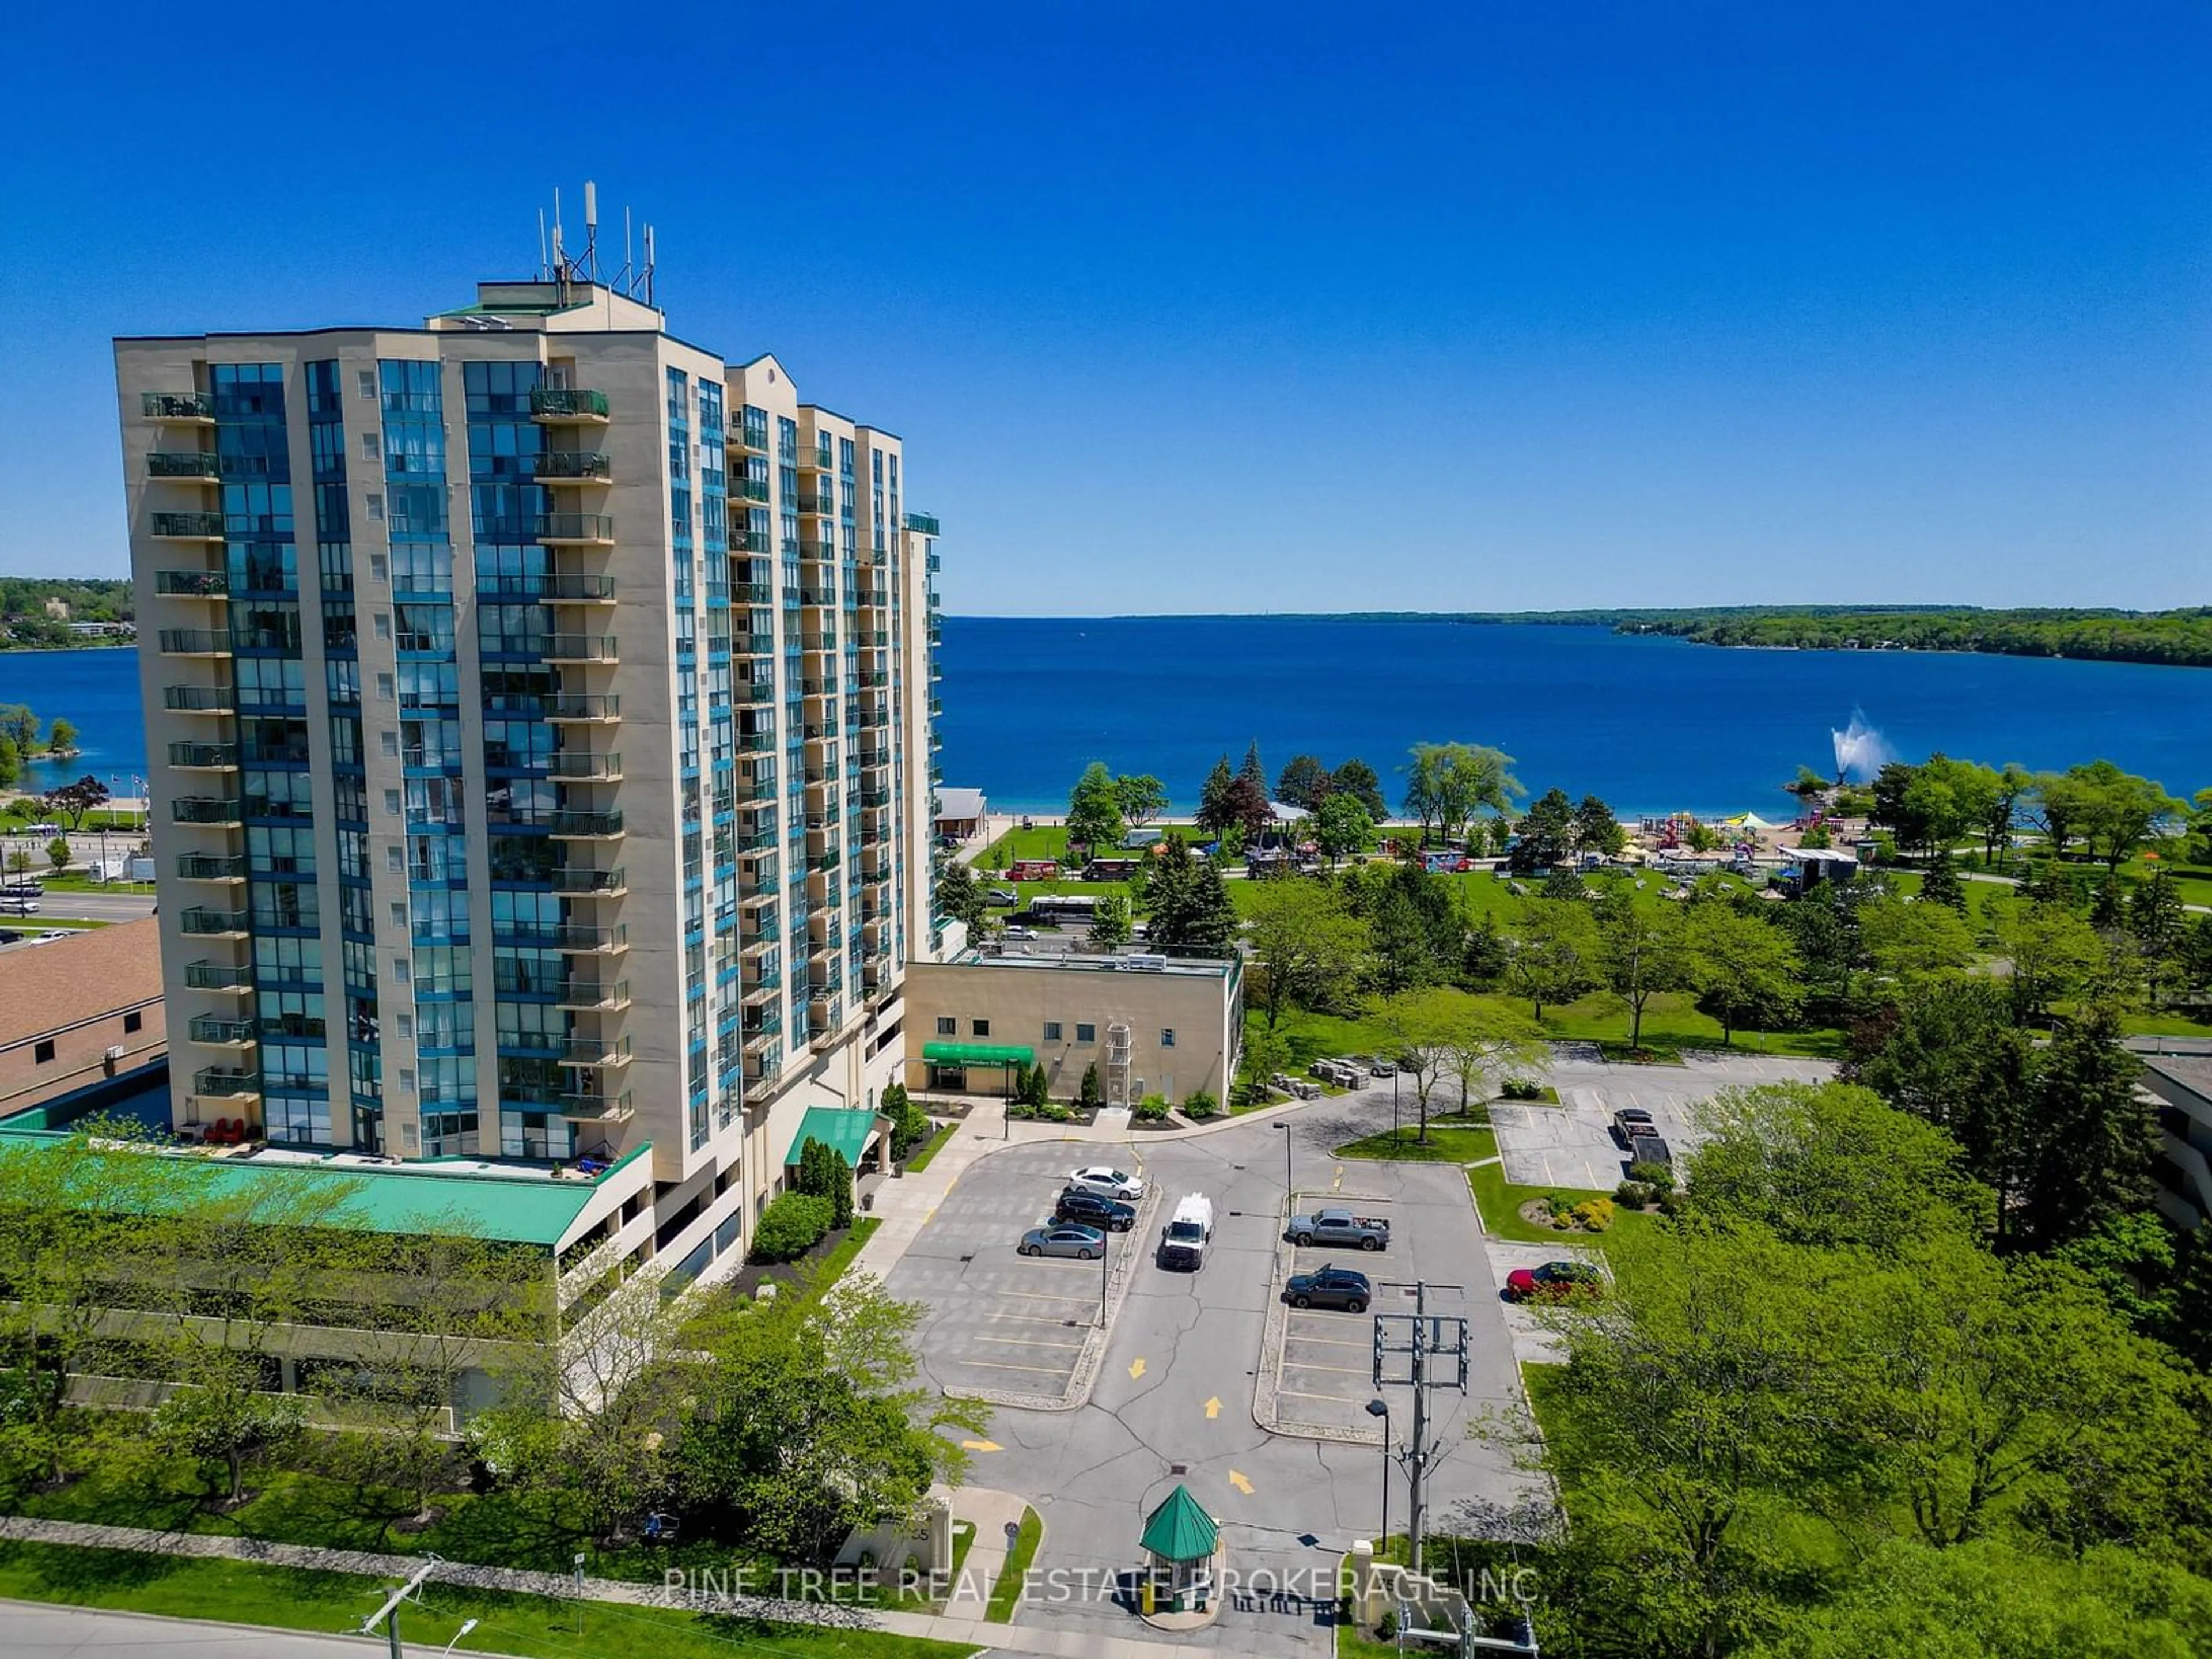 Lakeview for 65 Ellen St #208, Barrie Ontario L4N 3A5